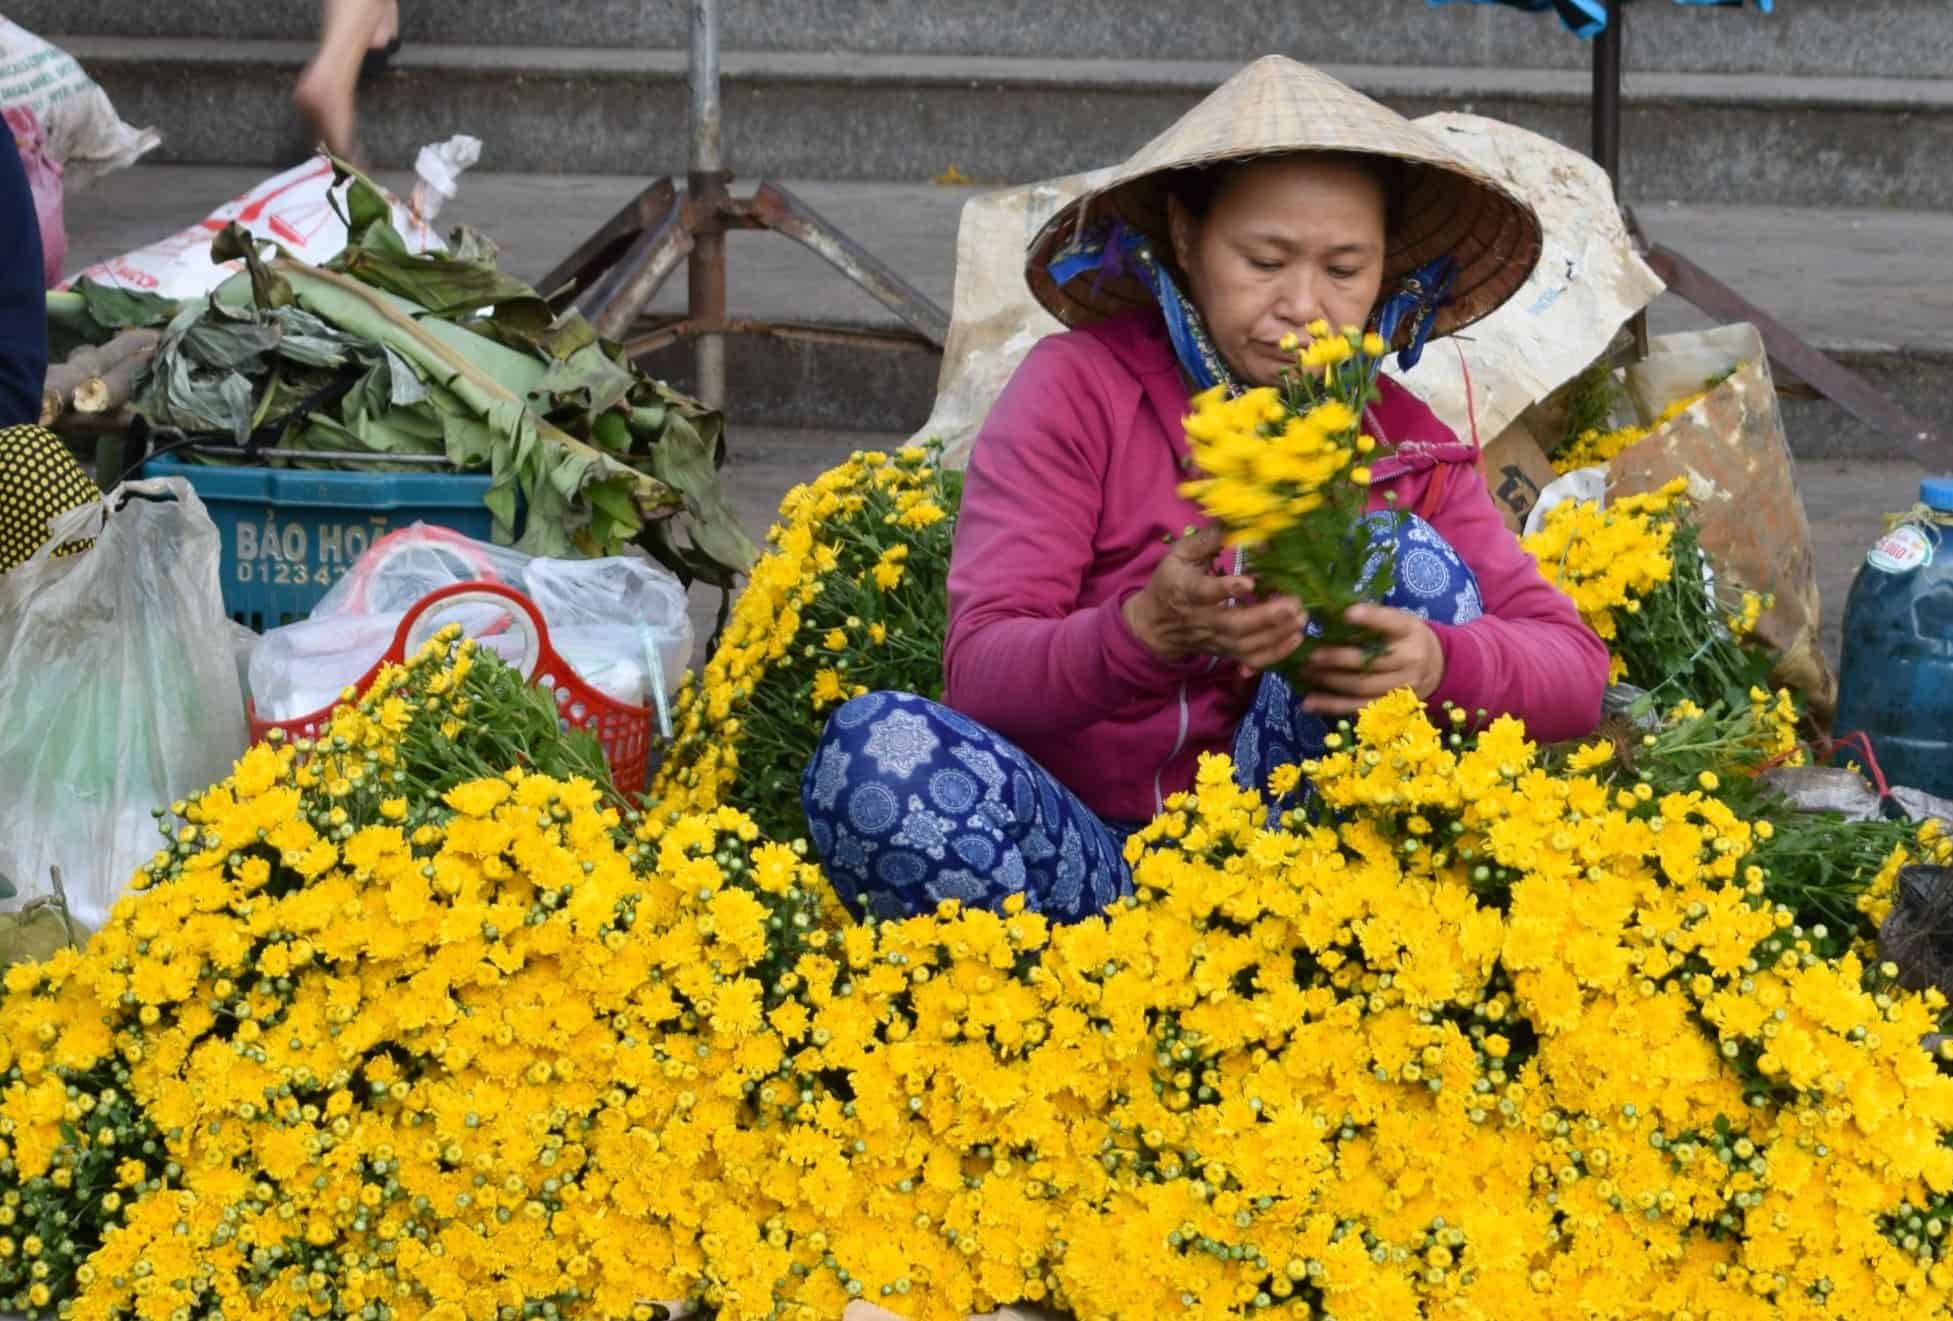 Selling flowers at Hoi An Market Vietnam